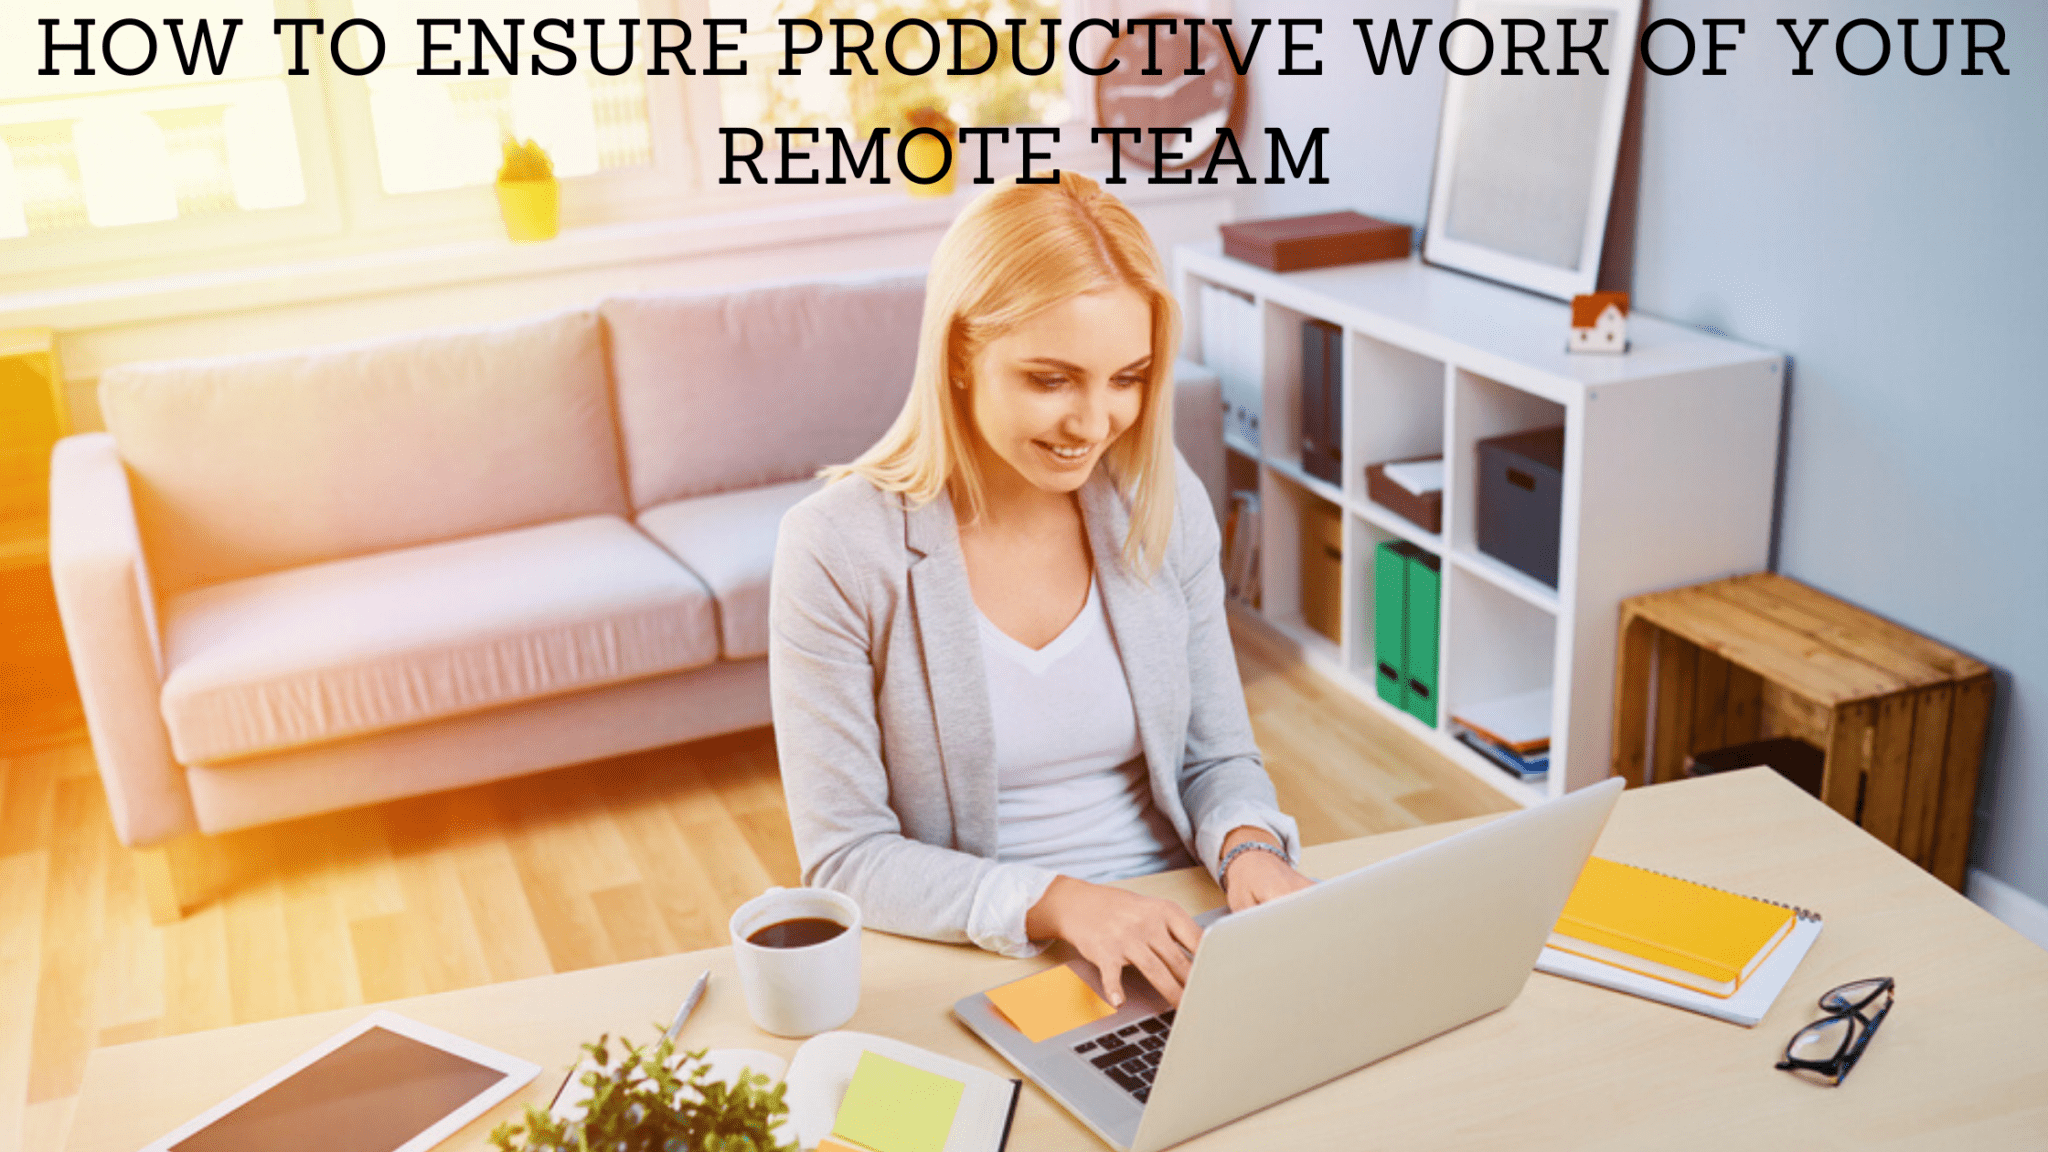 How To Ensure Productive Work Of Your Remote Team